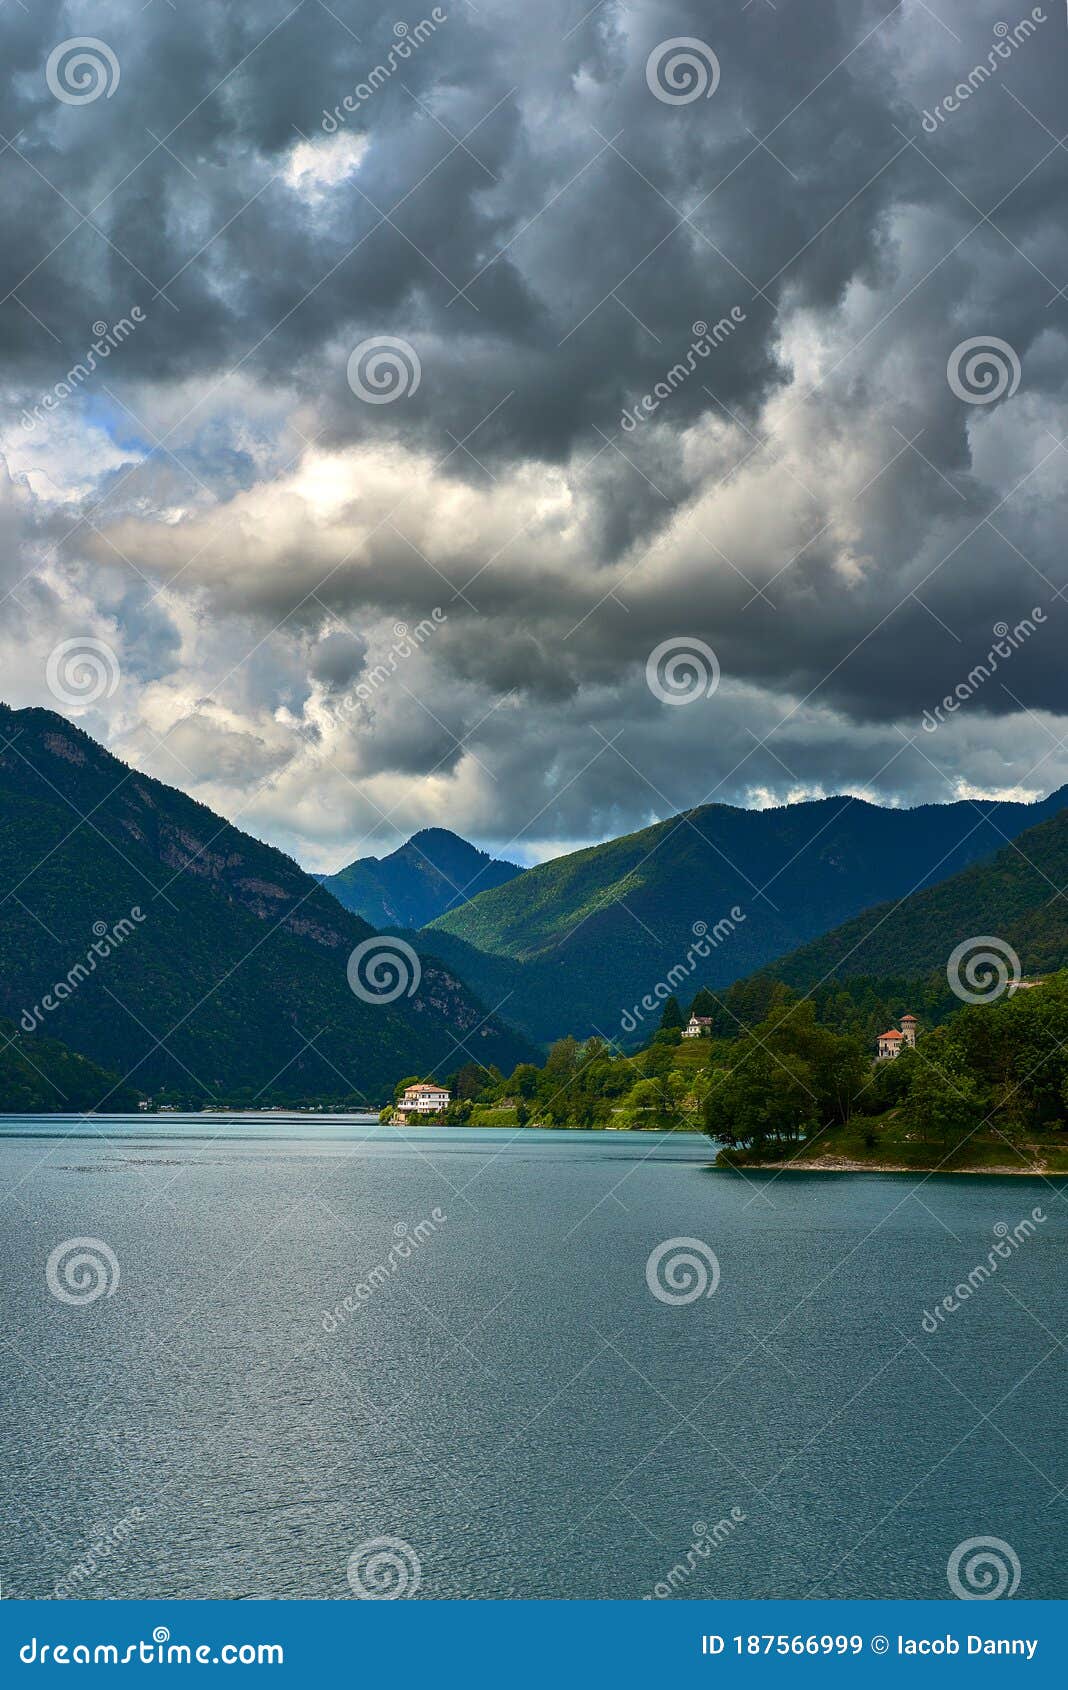 italy, trentino alto adige: view of ledro lake in a cloudy day